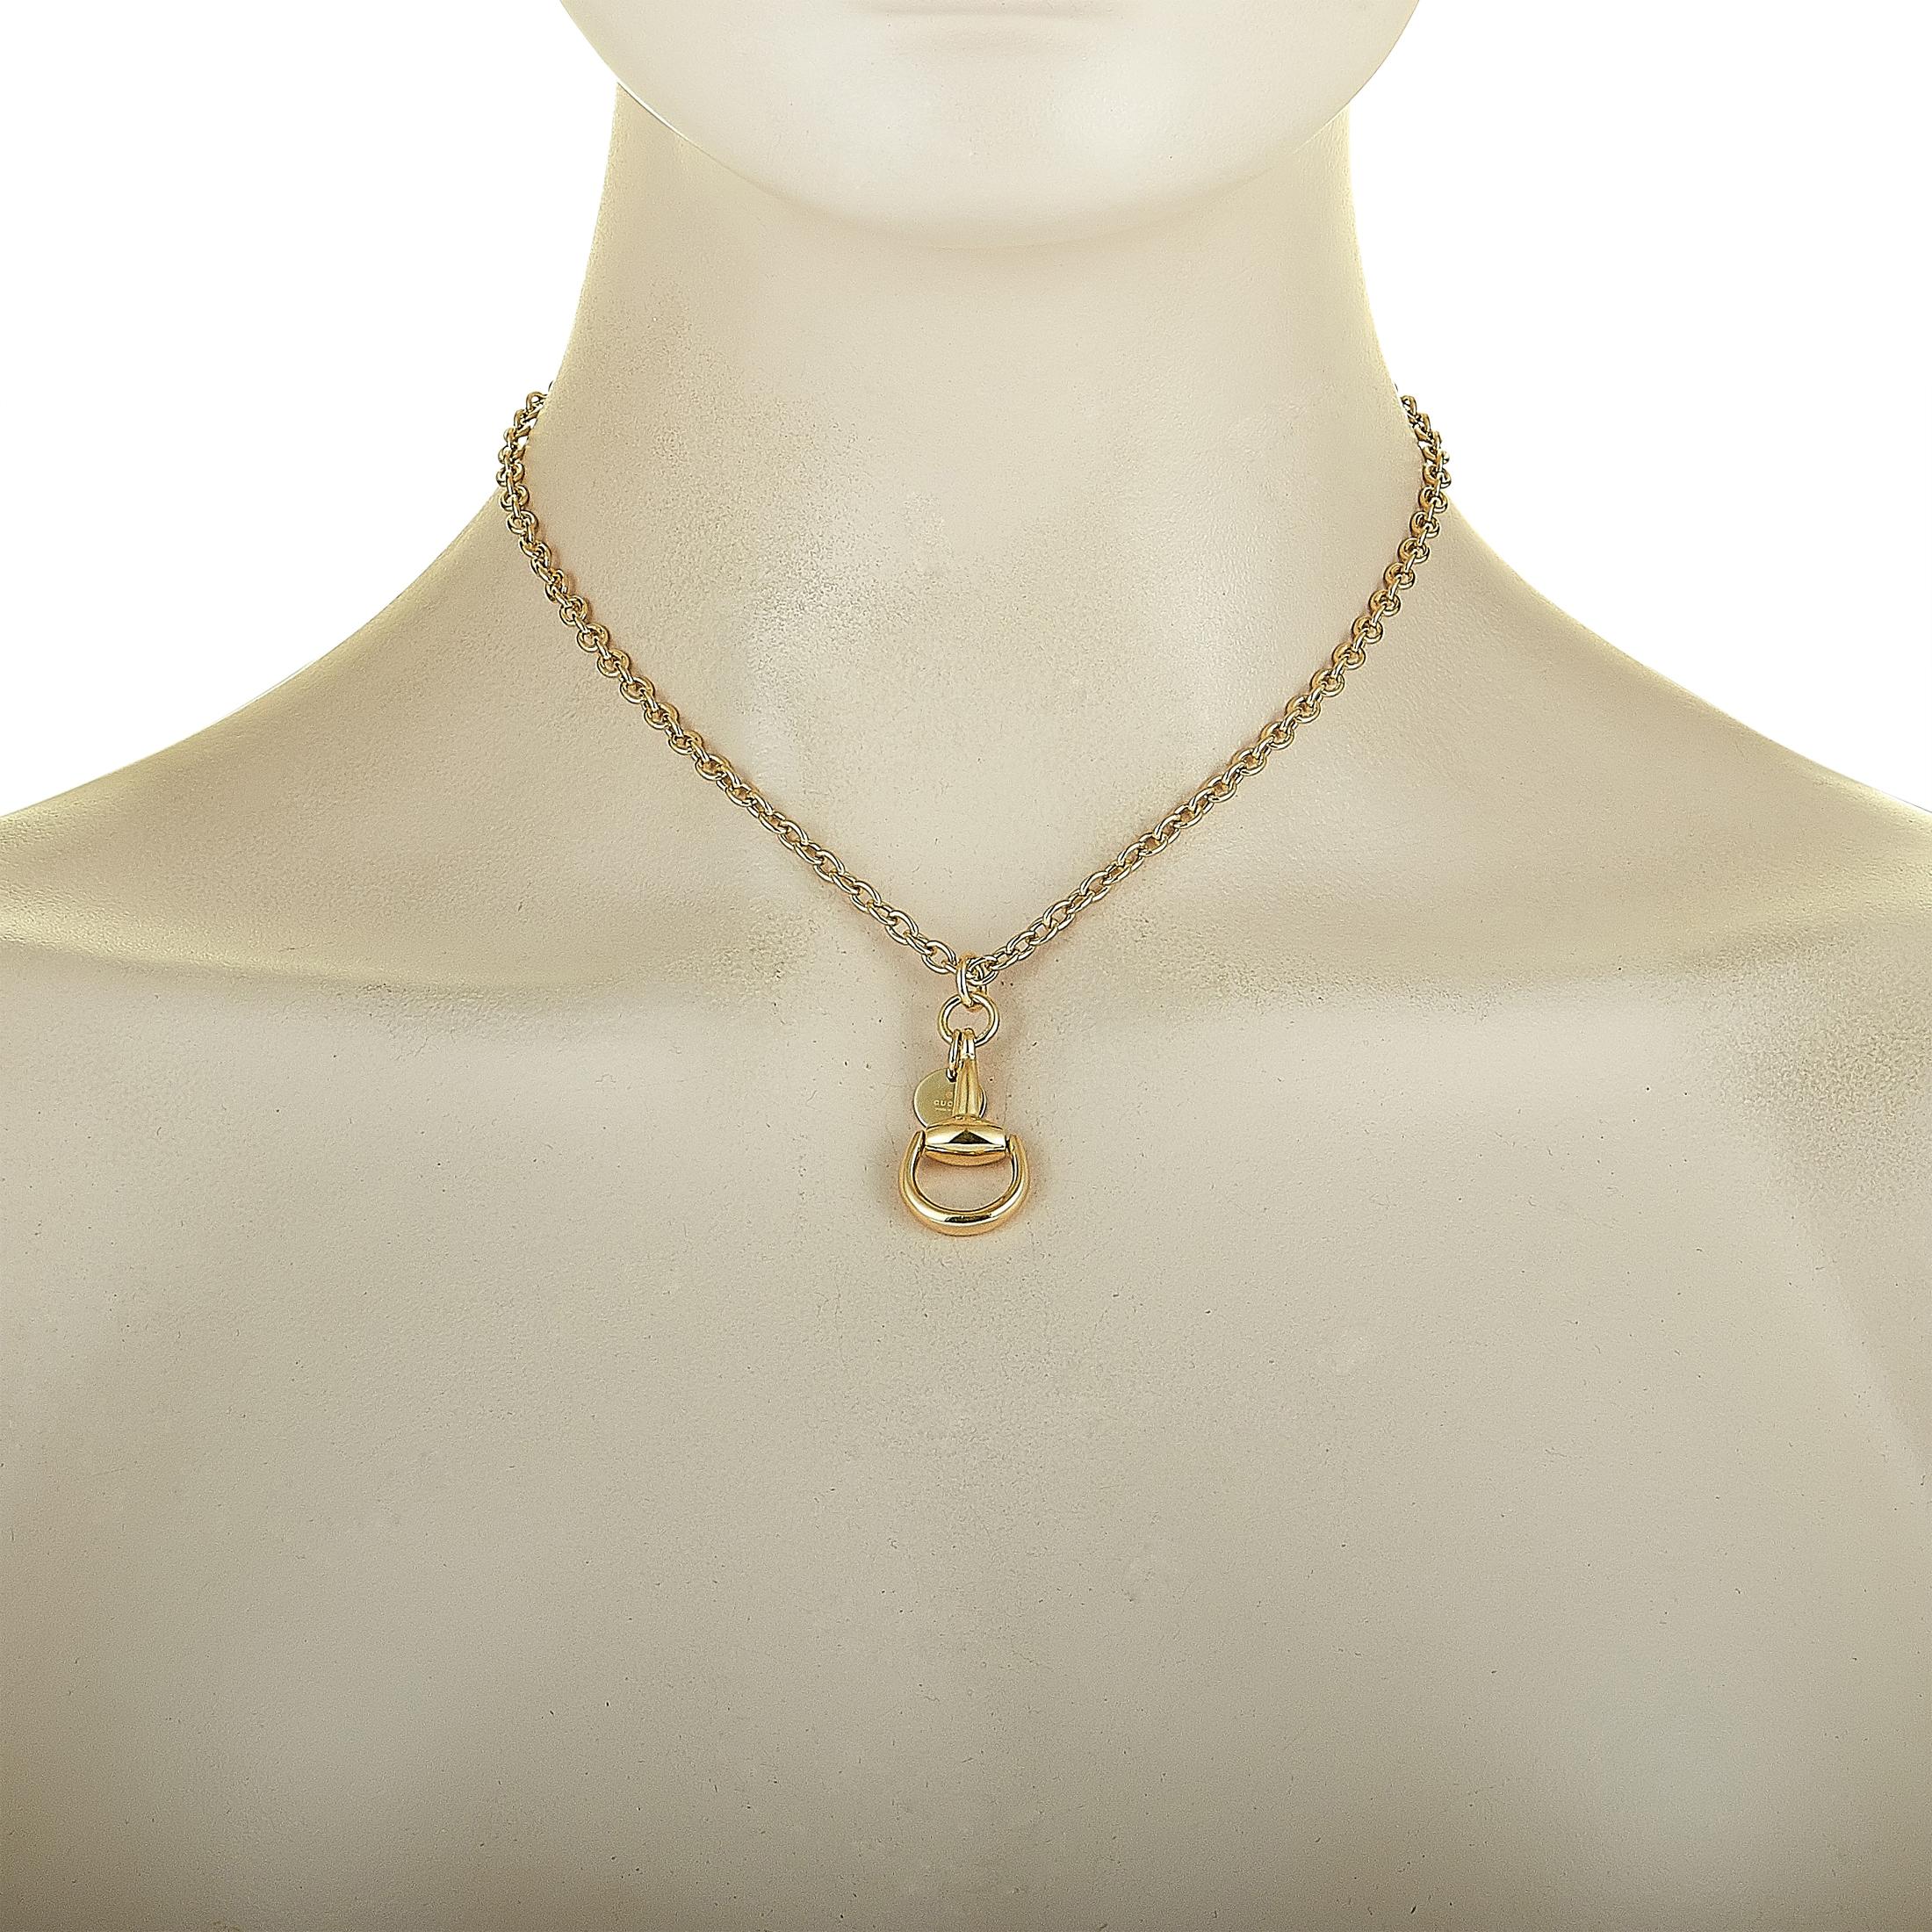 The Gucci “Horsebit” necklace is made of 18K yellow gold and weighs 18 grams. The necklace boasts a 16” chain and a pendant that measures 1.37” in length and 0.62” in width.

This jewelry piece is offered in brand new condition and includes the